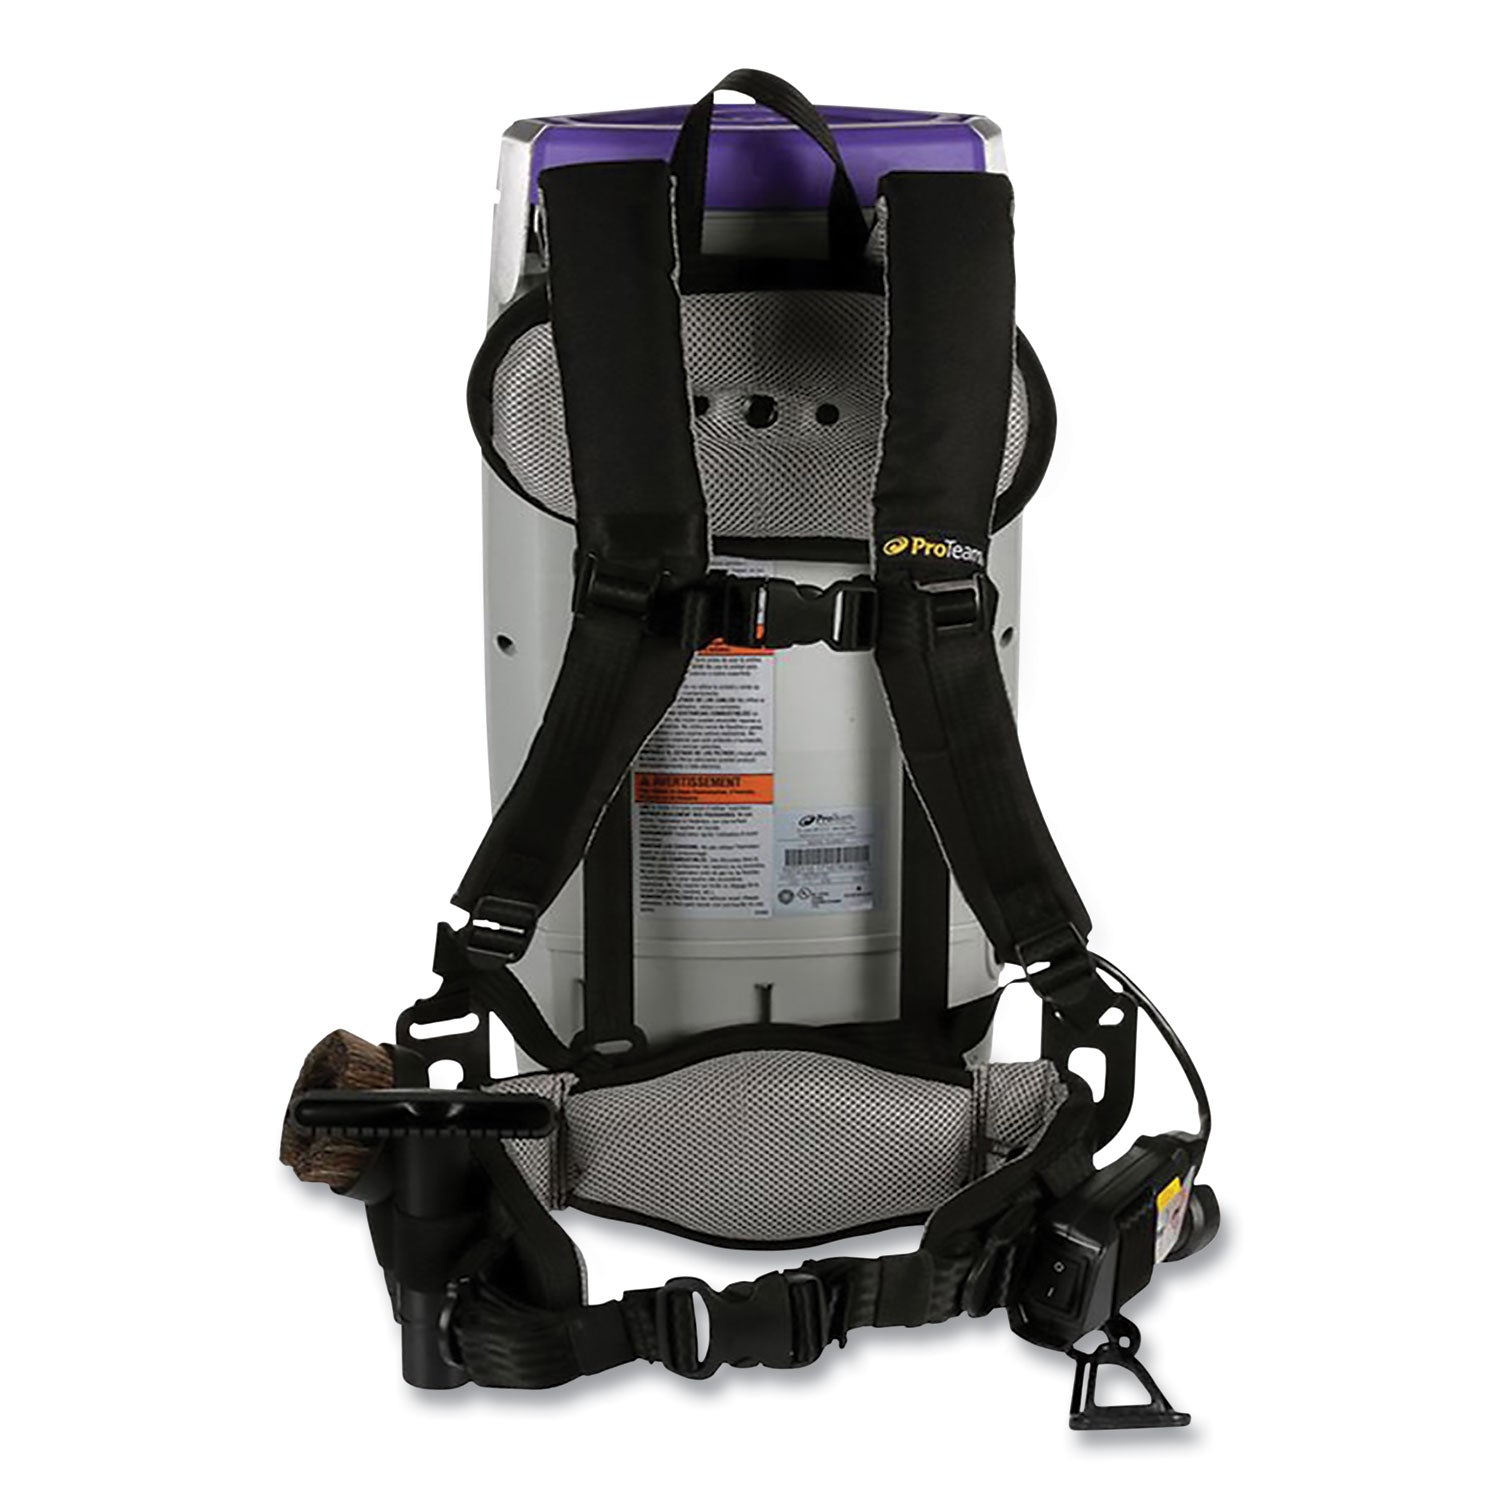 super-coach-pro-10-backpack-vacuum-with-xover-fixed-length-two-piece-wand-10-qt-tank-capacity-gray-purple_ptm107304 - 4